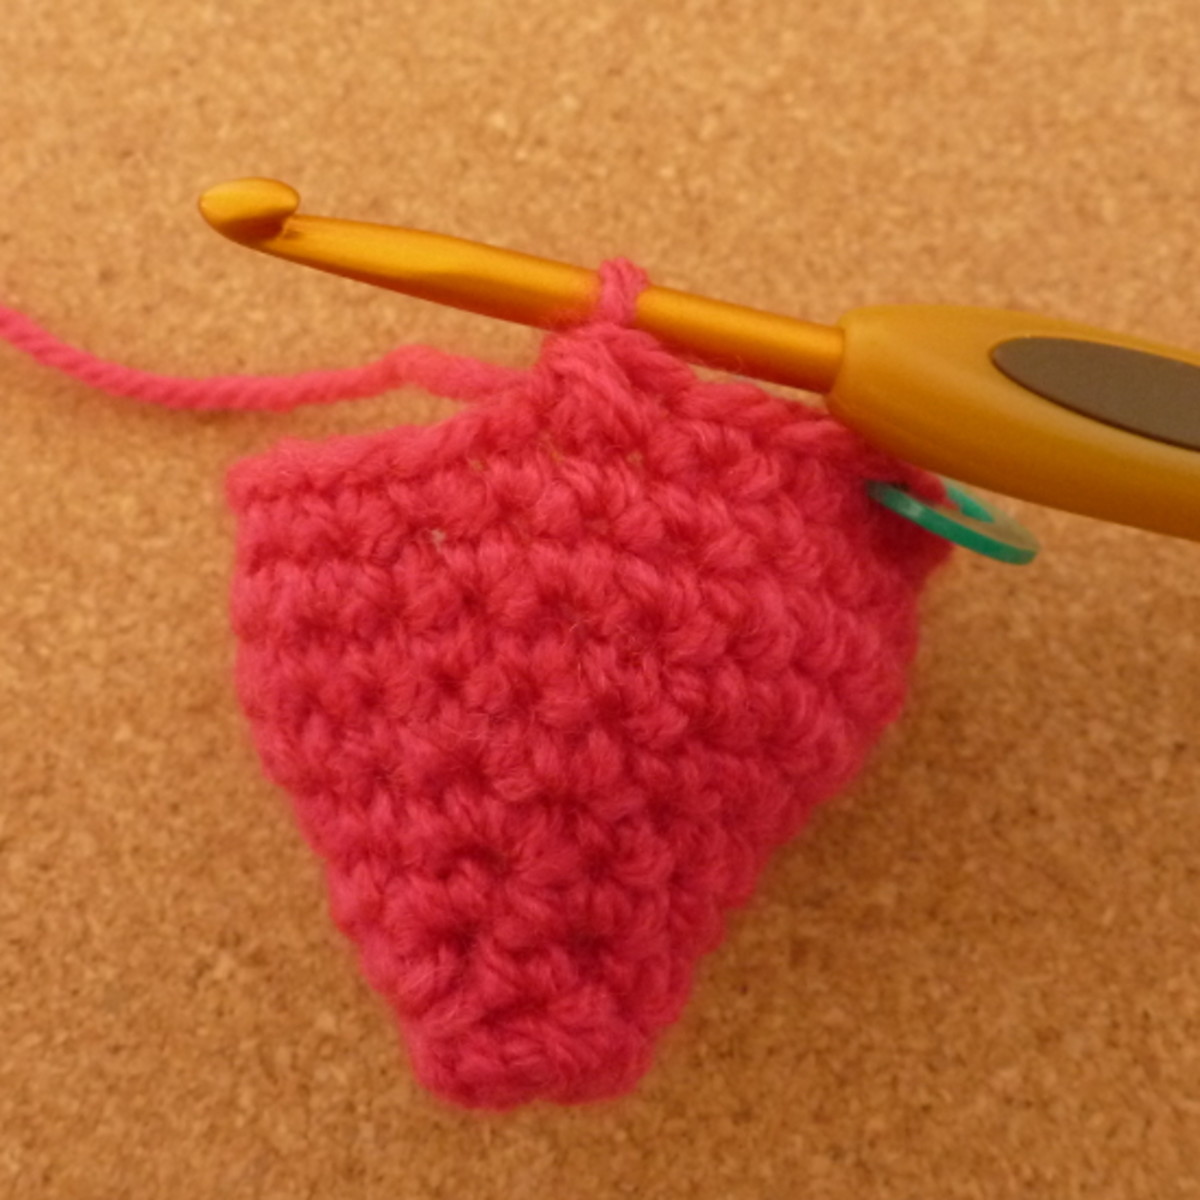 Crocheting round to make a 3D design